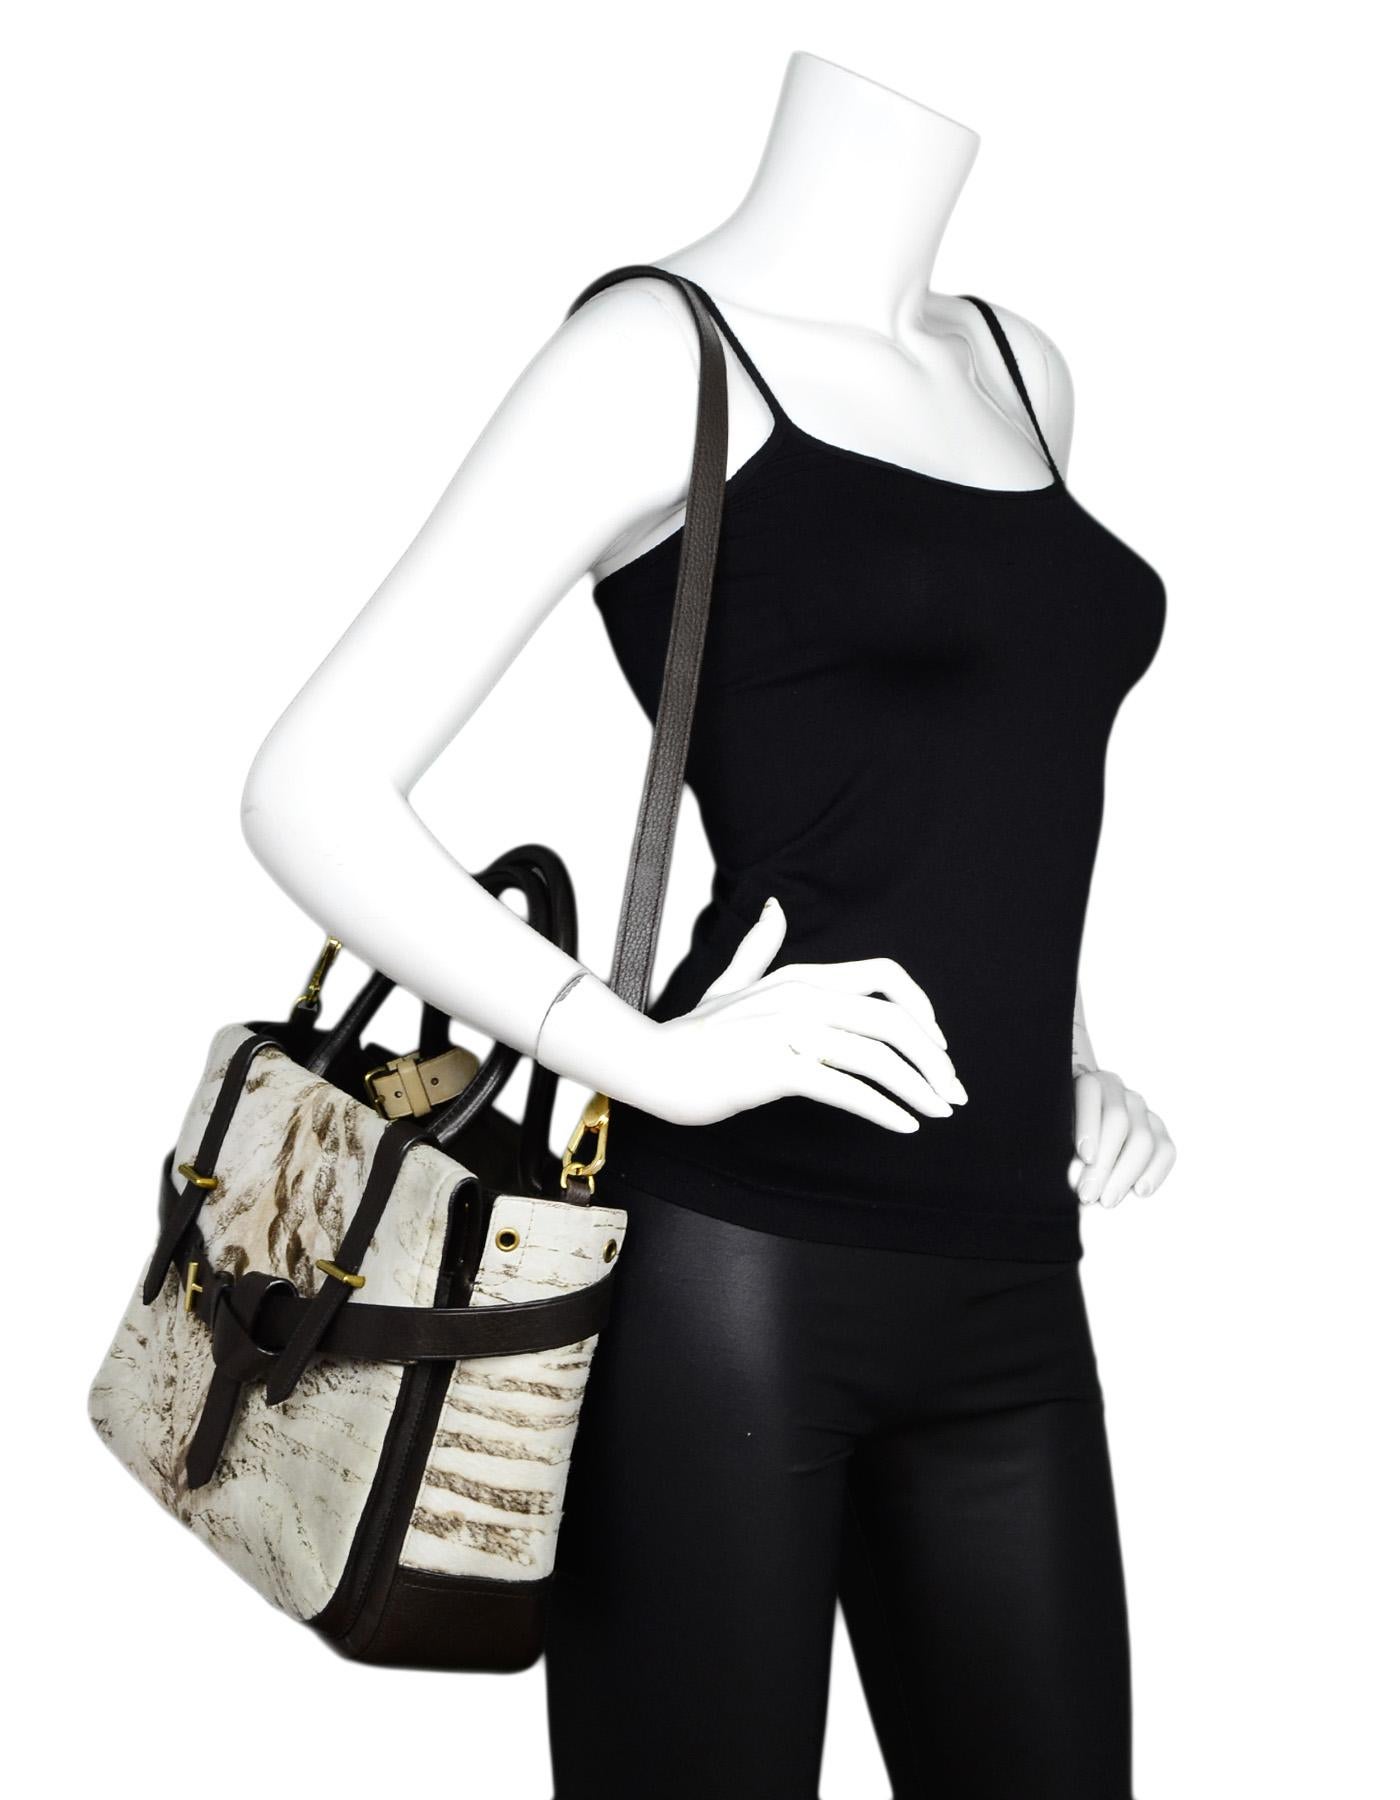 Reed Krakoff Brown Leather Pony Hair Animal Print Boxer Tote Bag W/ Strap

Made In: China
Color: Brown/white animal print
Hardware: Goldtone
Materials: Leather and pony hair
Lining: Black textile
Closure/Opening: Open top
Exterior Pockets: One rear